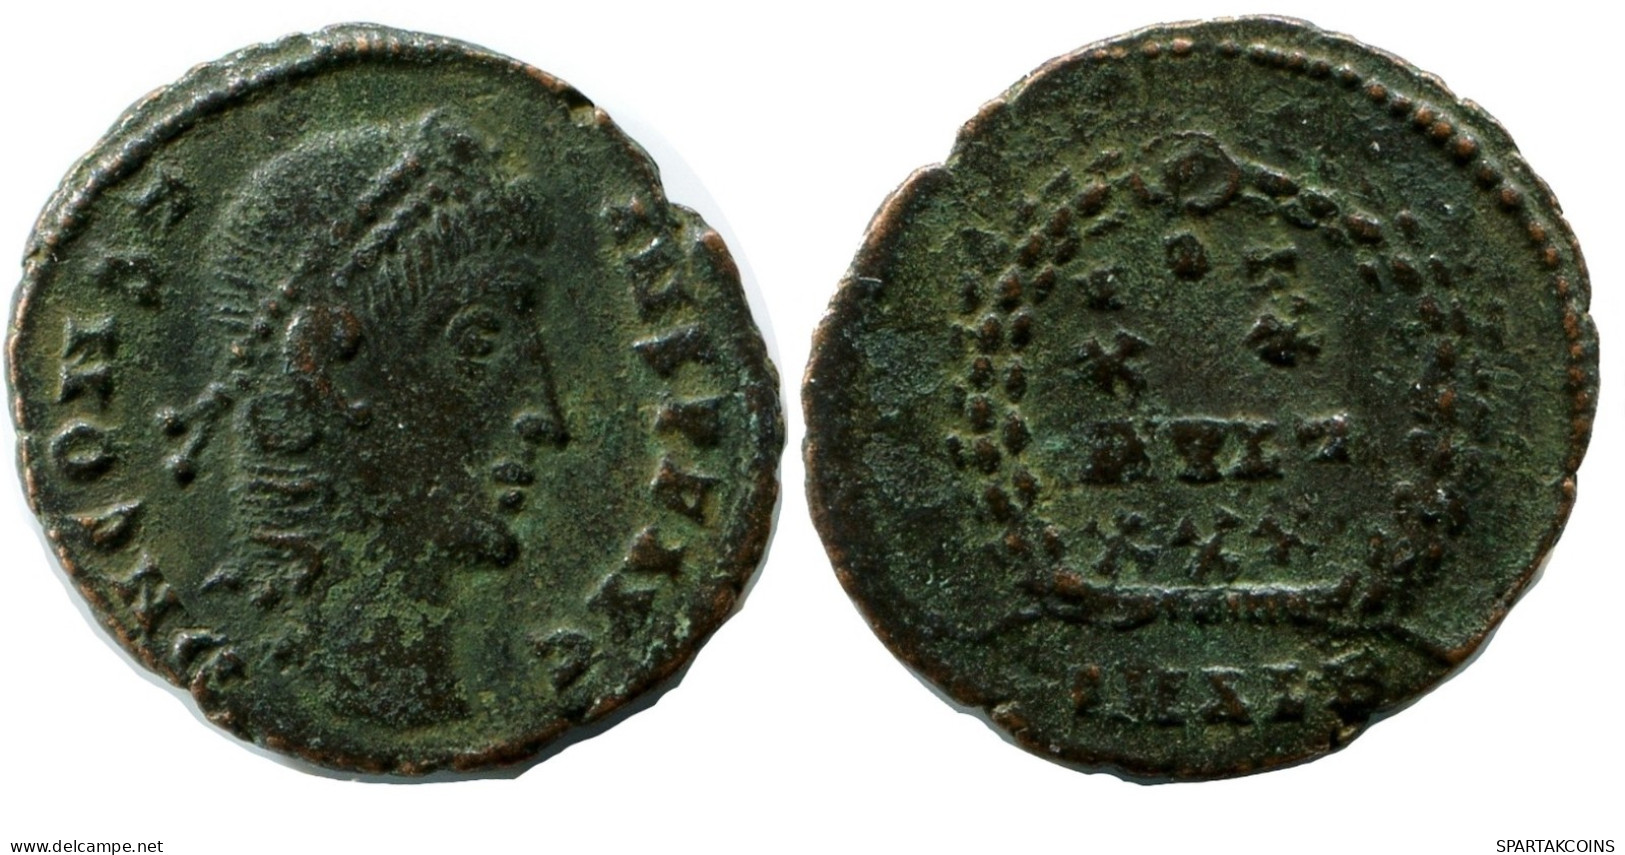 CONSTANS MINTED IN ALEKSANDRIA FROM THE ROYAL ONTARIO MUSEUM #ANC11365.14.E.A - The Christian Empire (307 AD Tot 363 AD)